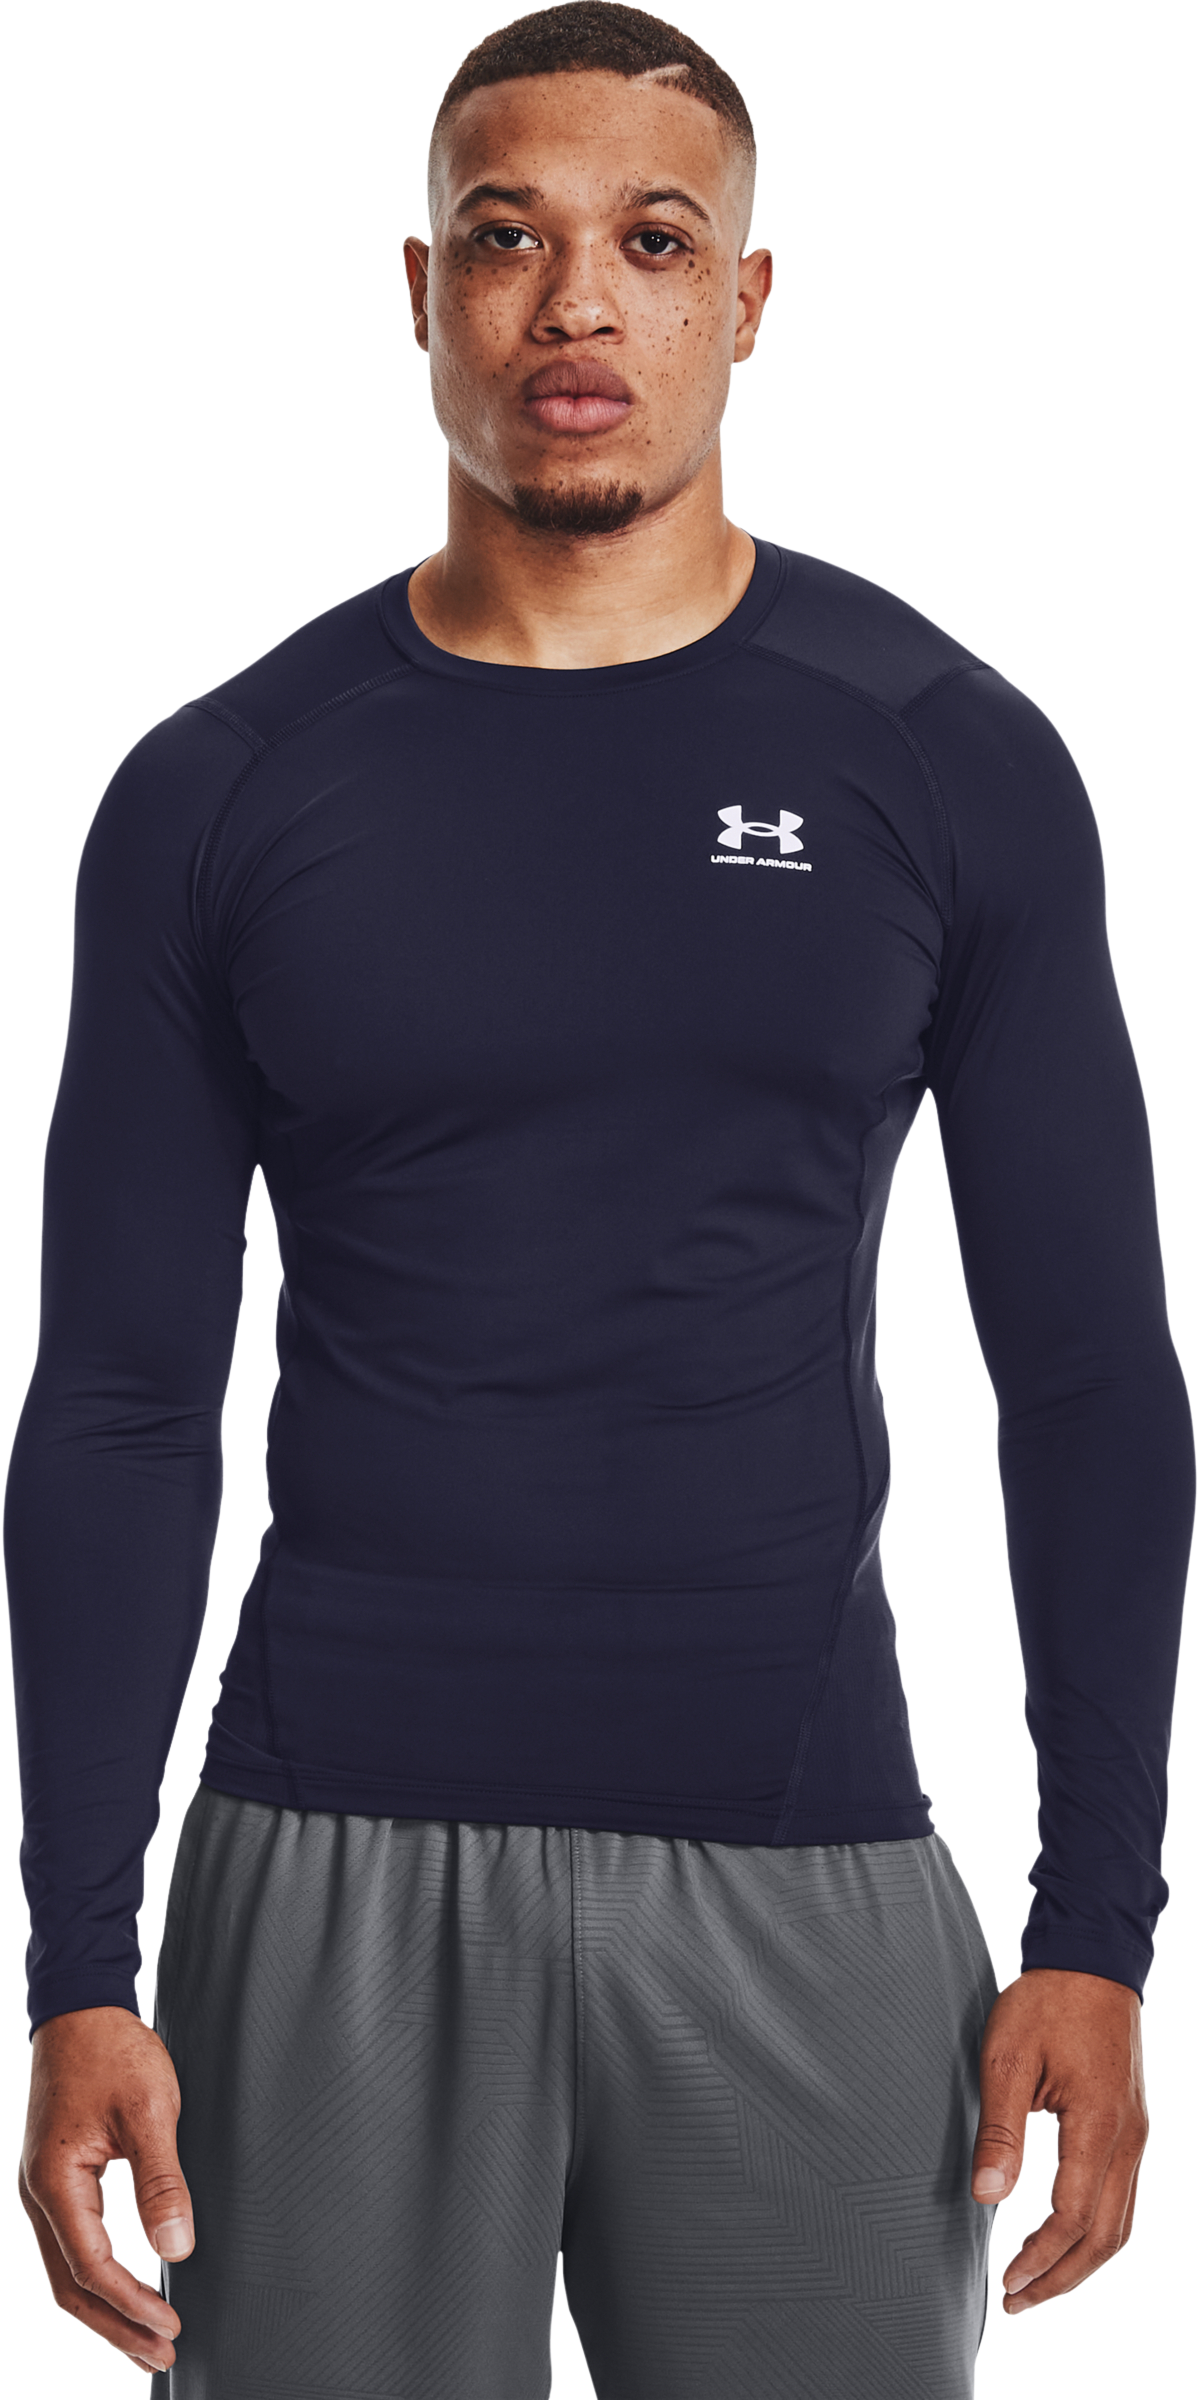 Under Armour Mens HeatGear Armour Long Sleeve Compression Top - White